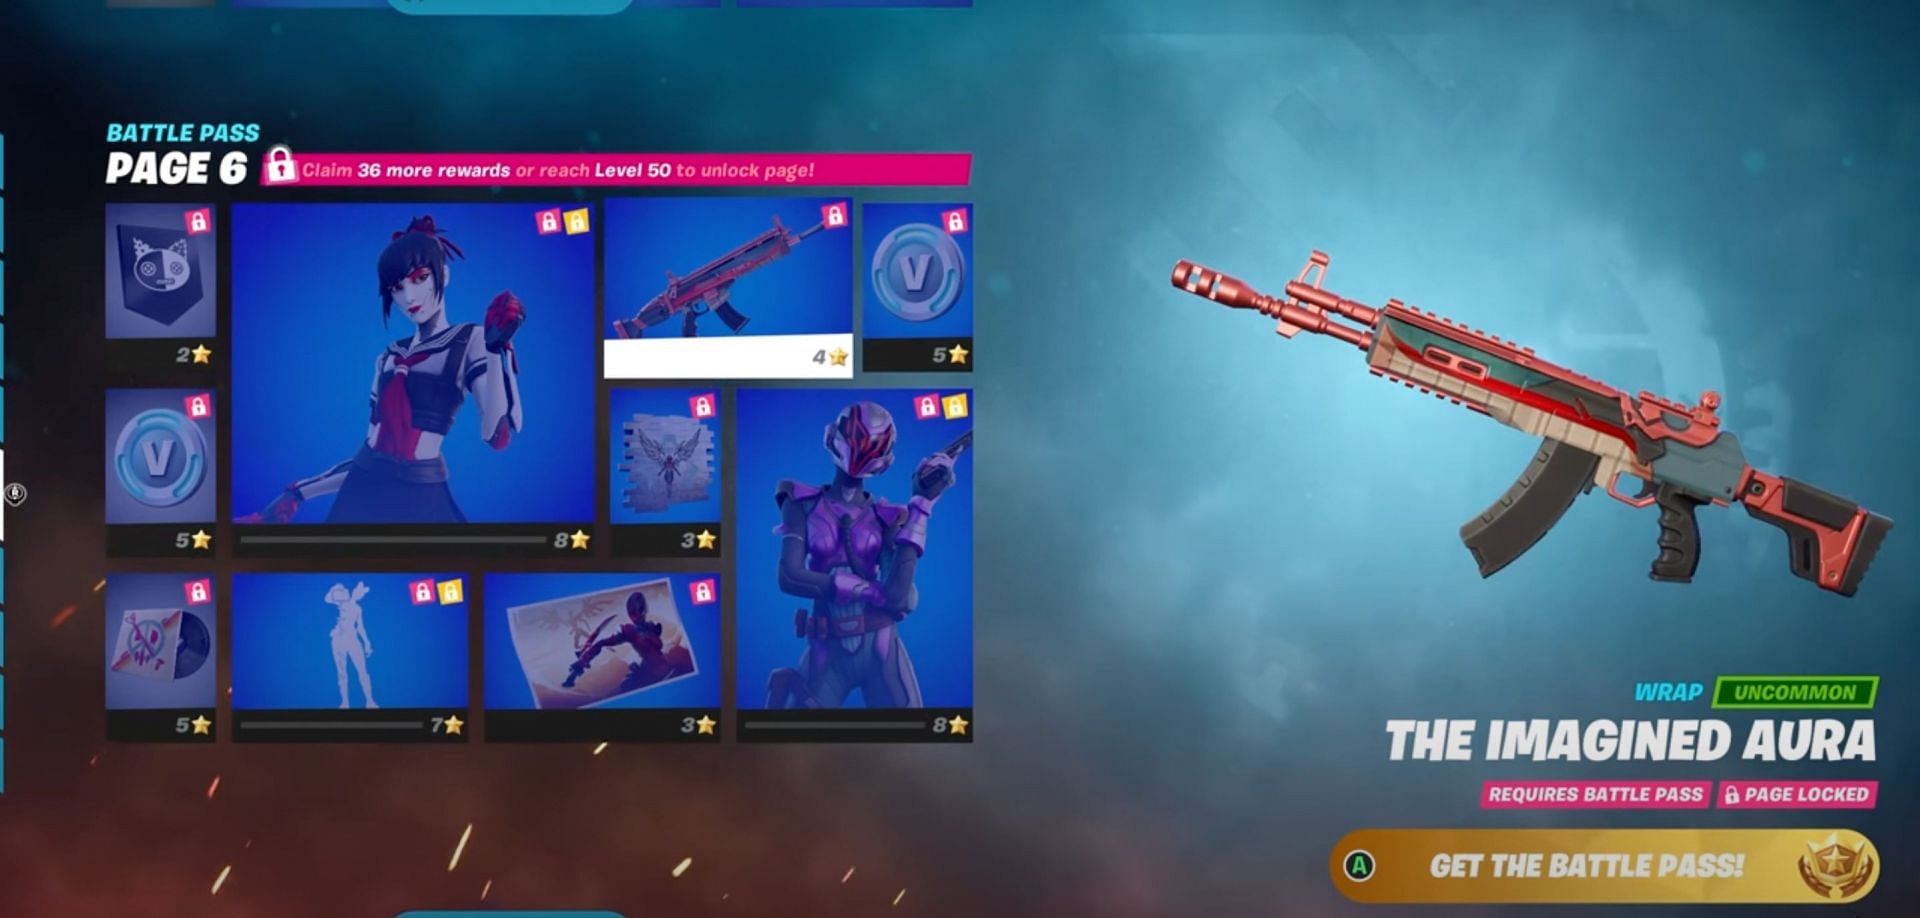 Page 6 of the Battle Pass (Image via Epic Games)